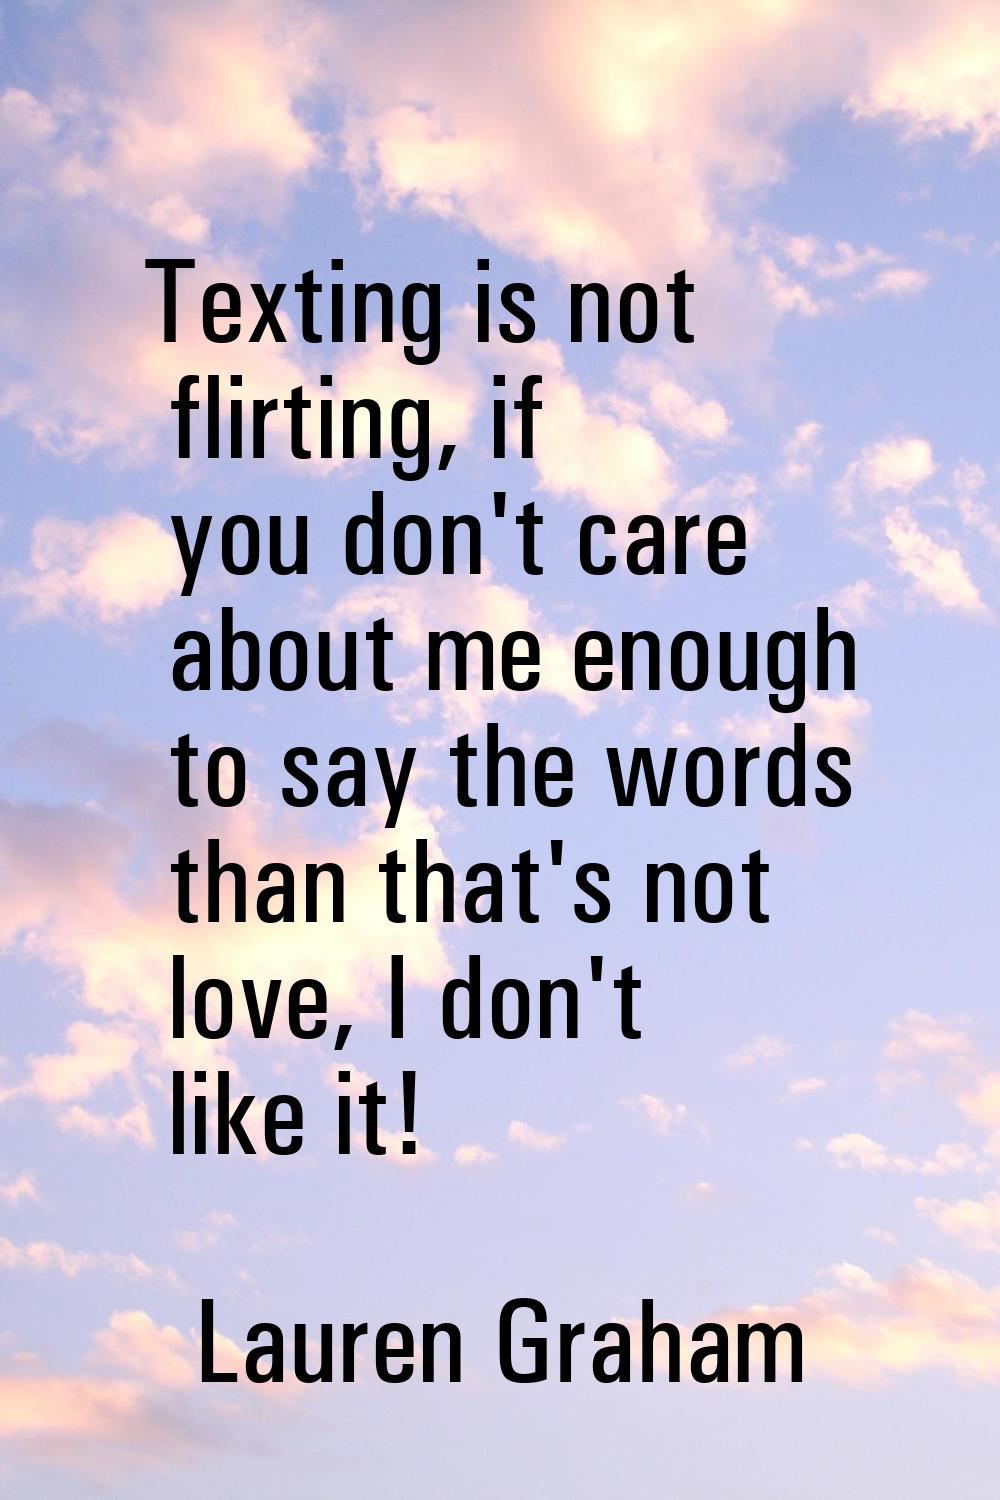 Texting is not flirting, if you don't care about me enough to say the words than that's not love, I